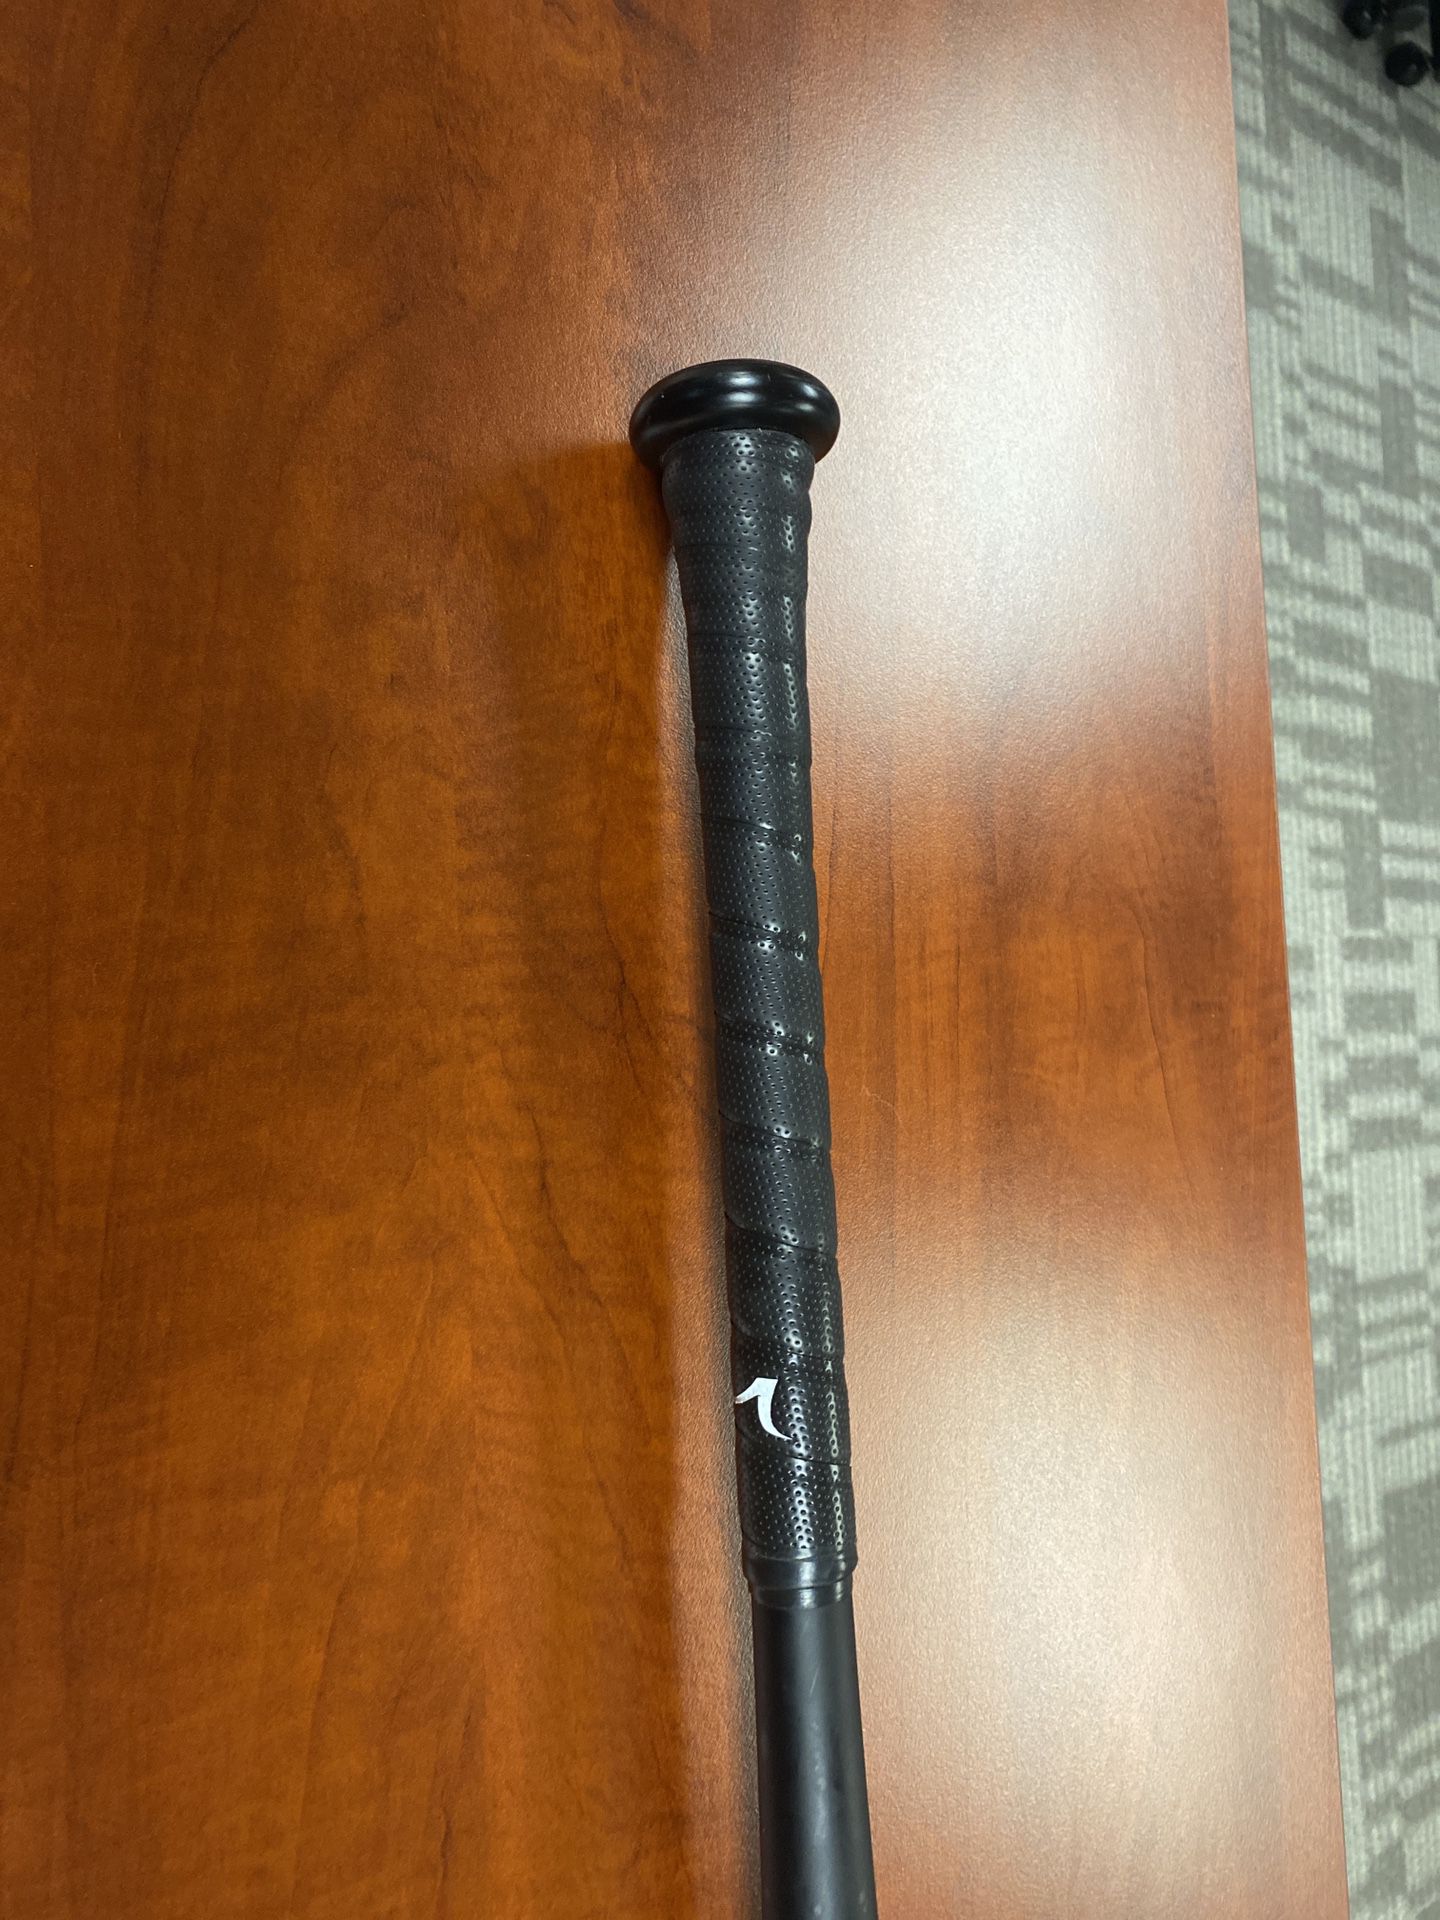 Barely used Victus Nox 33/30 BBCOR Baseball Bat. Son Used Once In Batting Practice. 